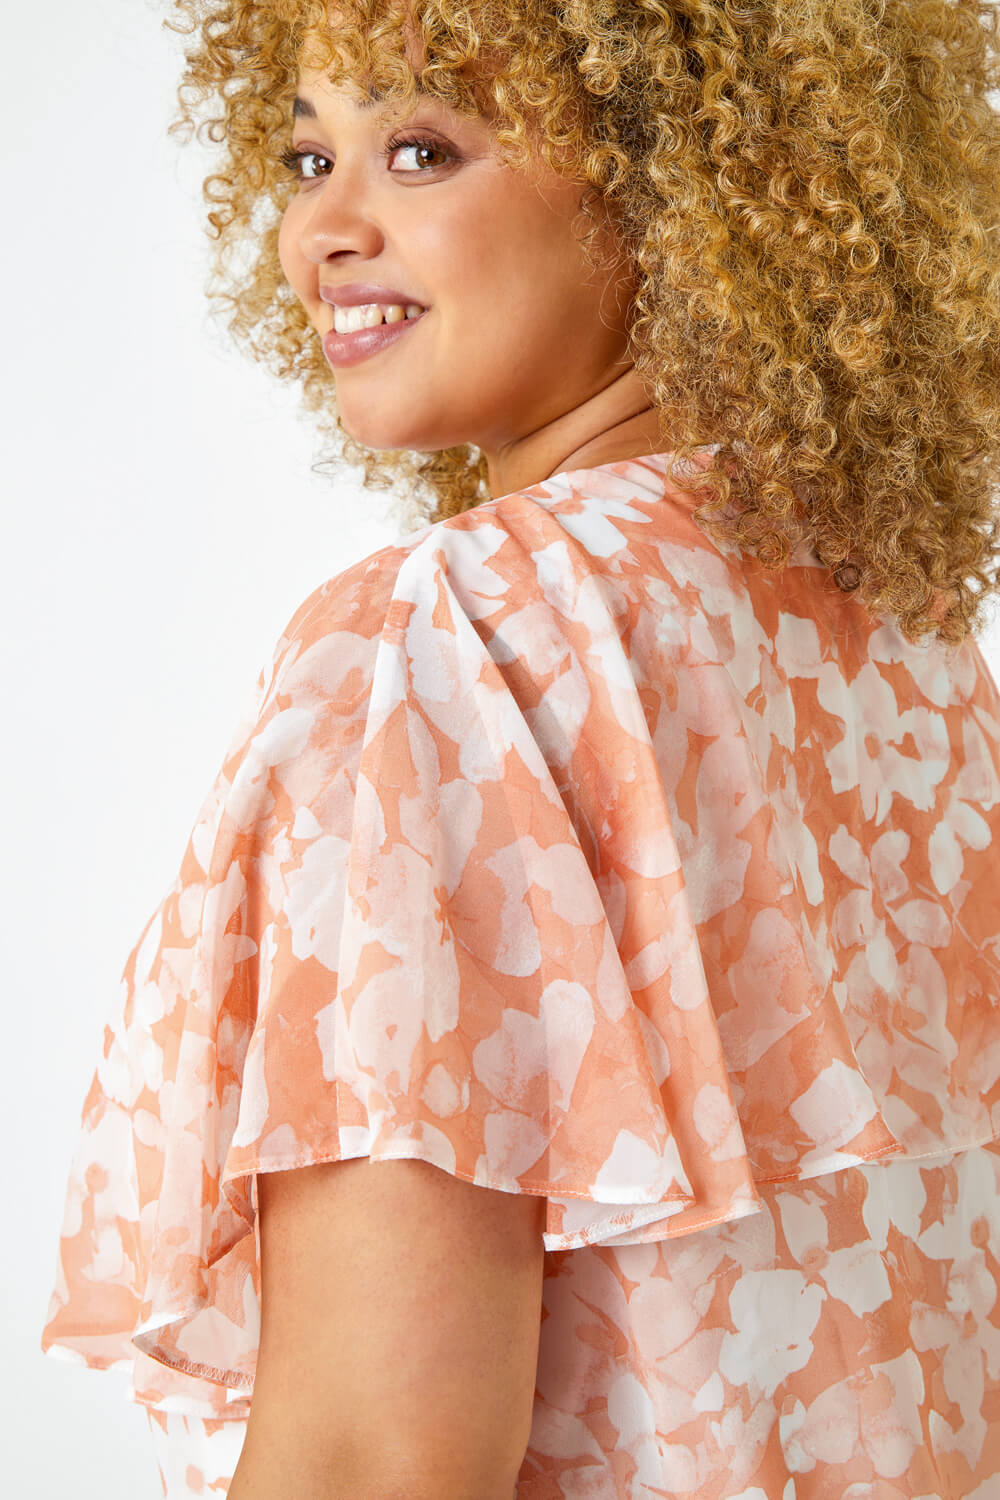 CORAL Curve Floral Chiffon Overlay Top, Image 5 of 5